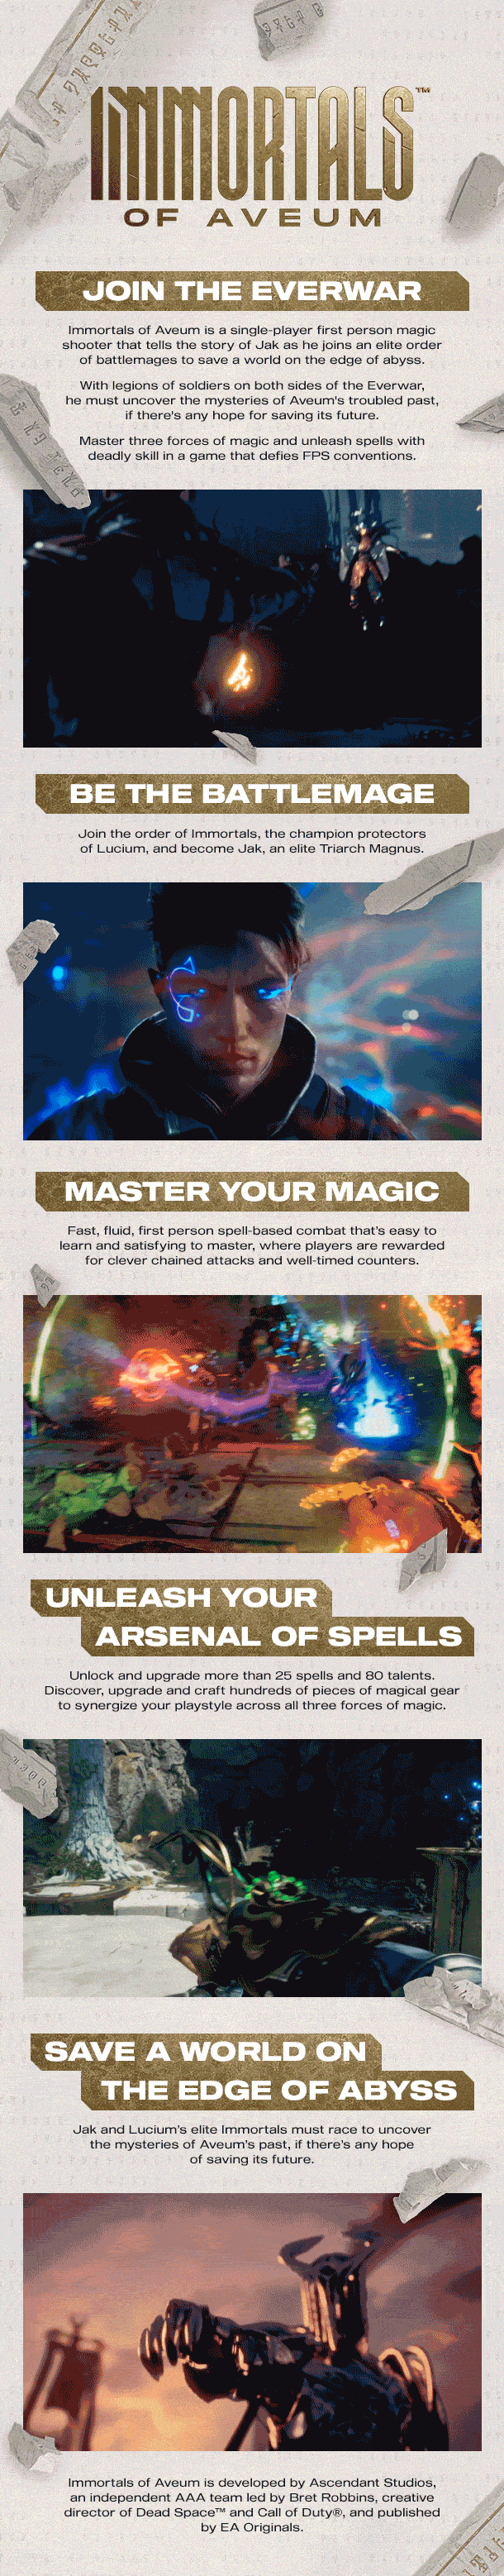 How To Learn, Upgrade And Master Spells/Magic